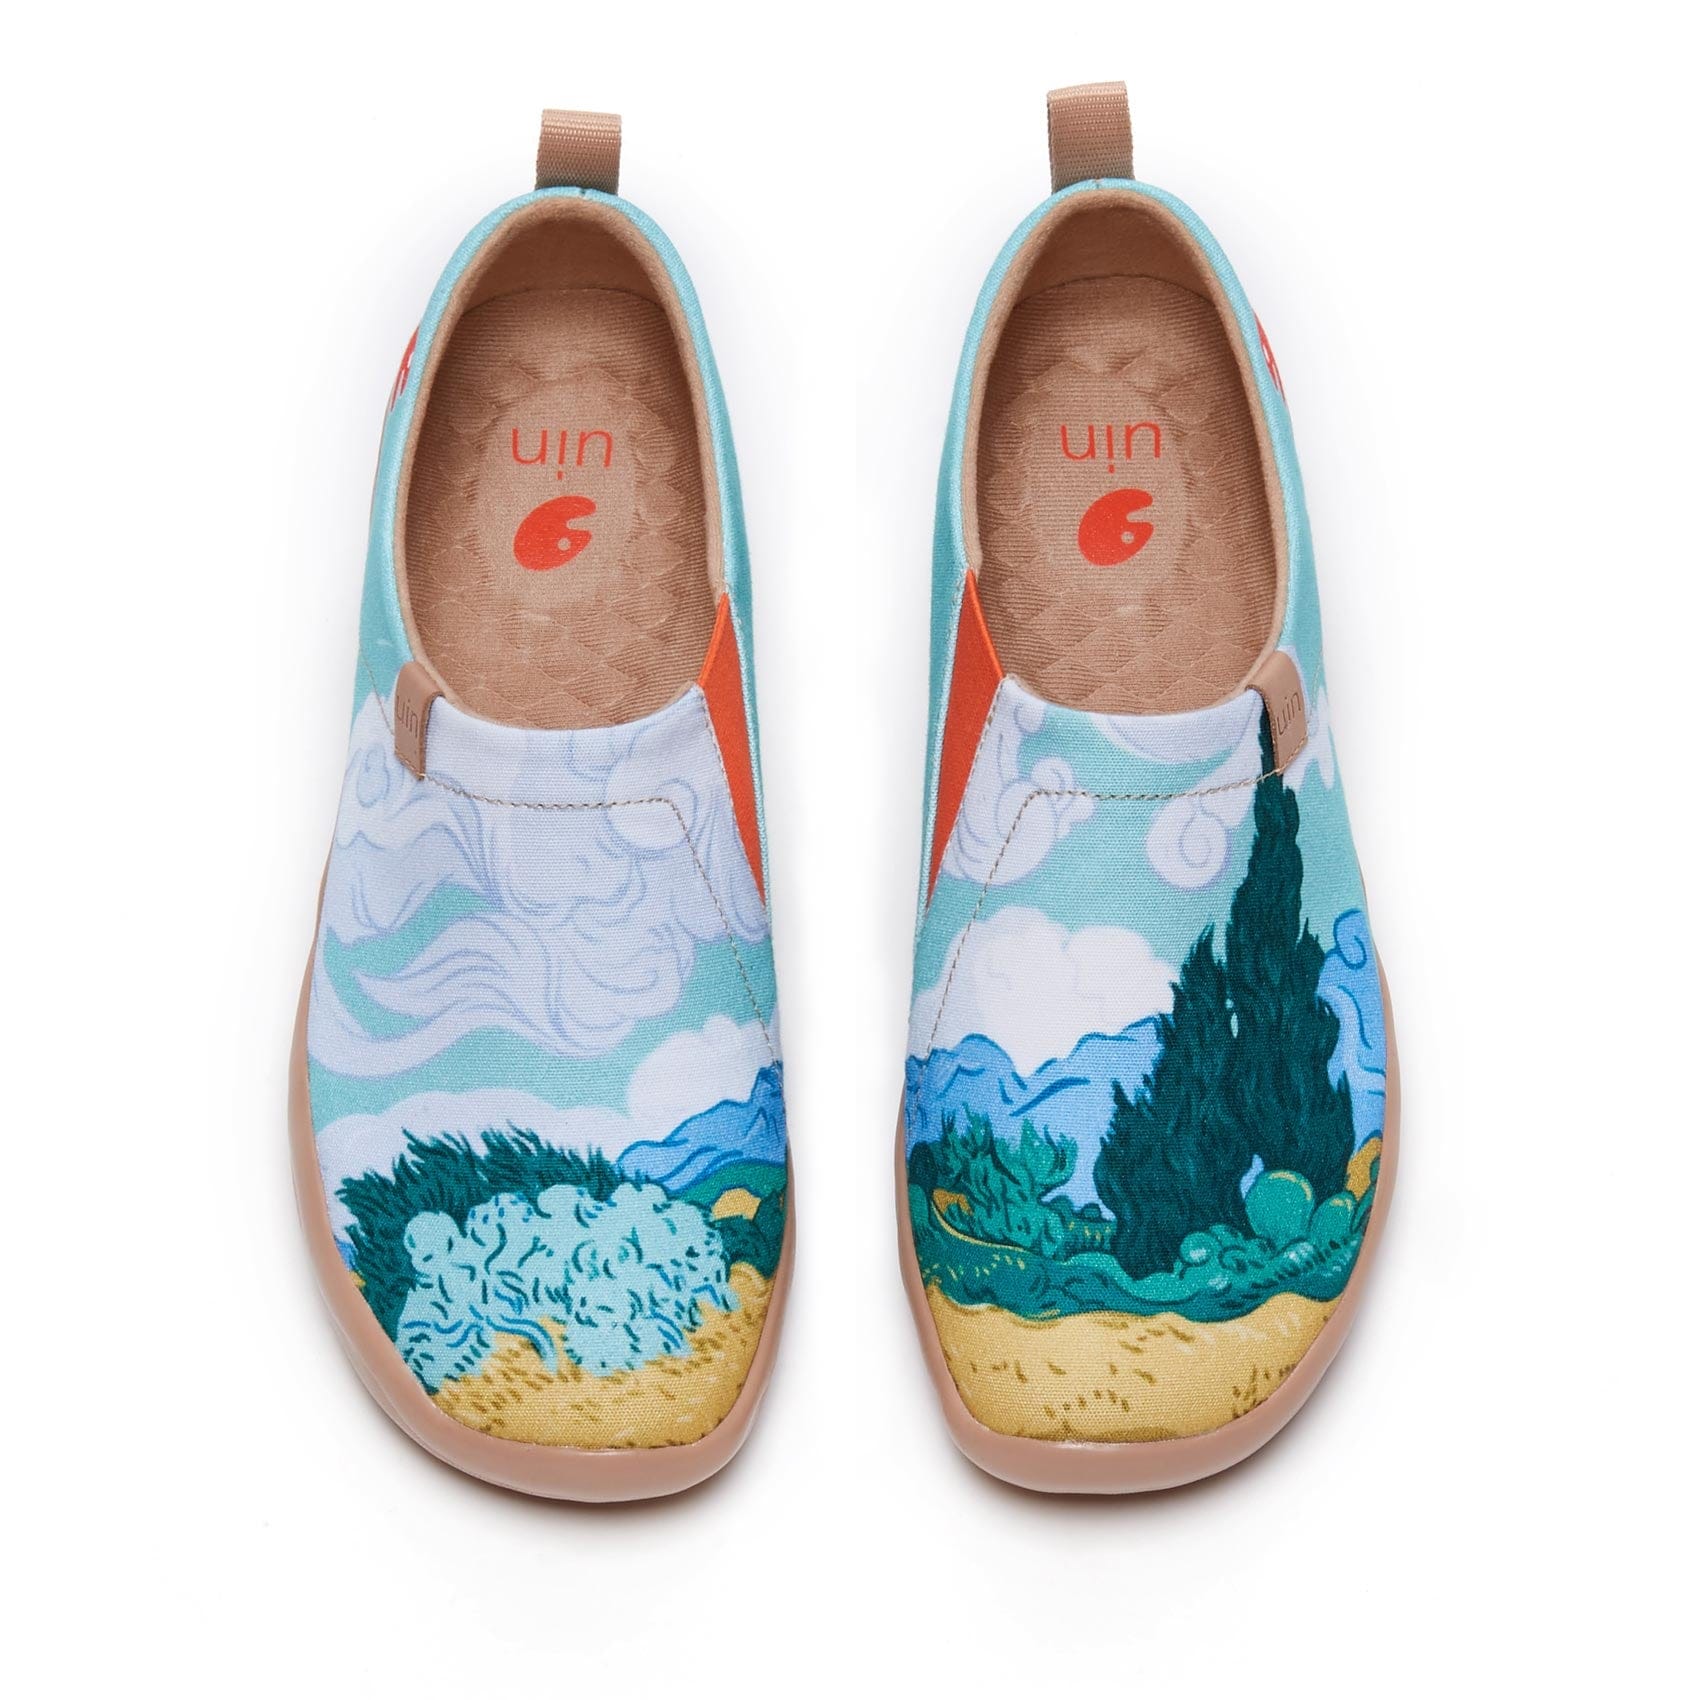 Van Gogh Wheatfield with Cypresses Women Art Canvas Shoes | UIN ...